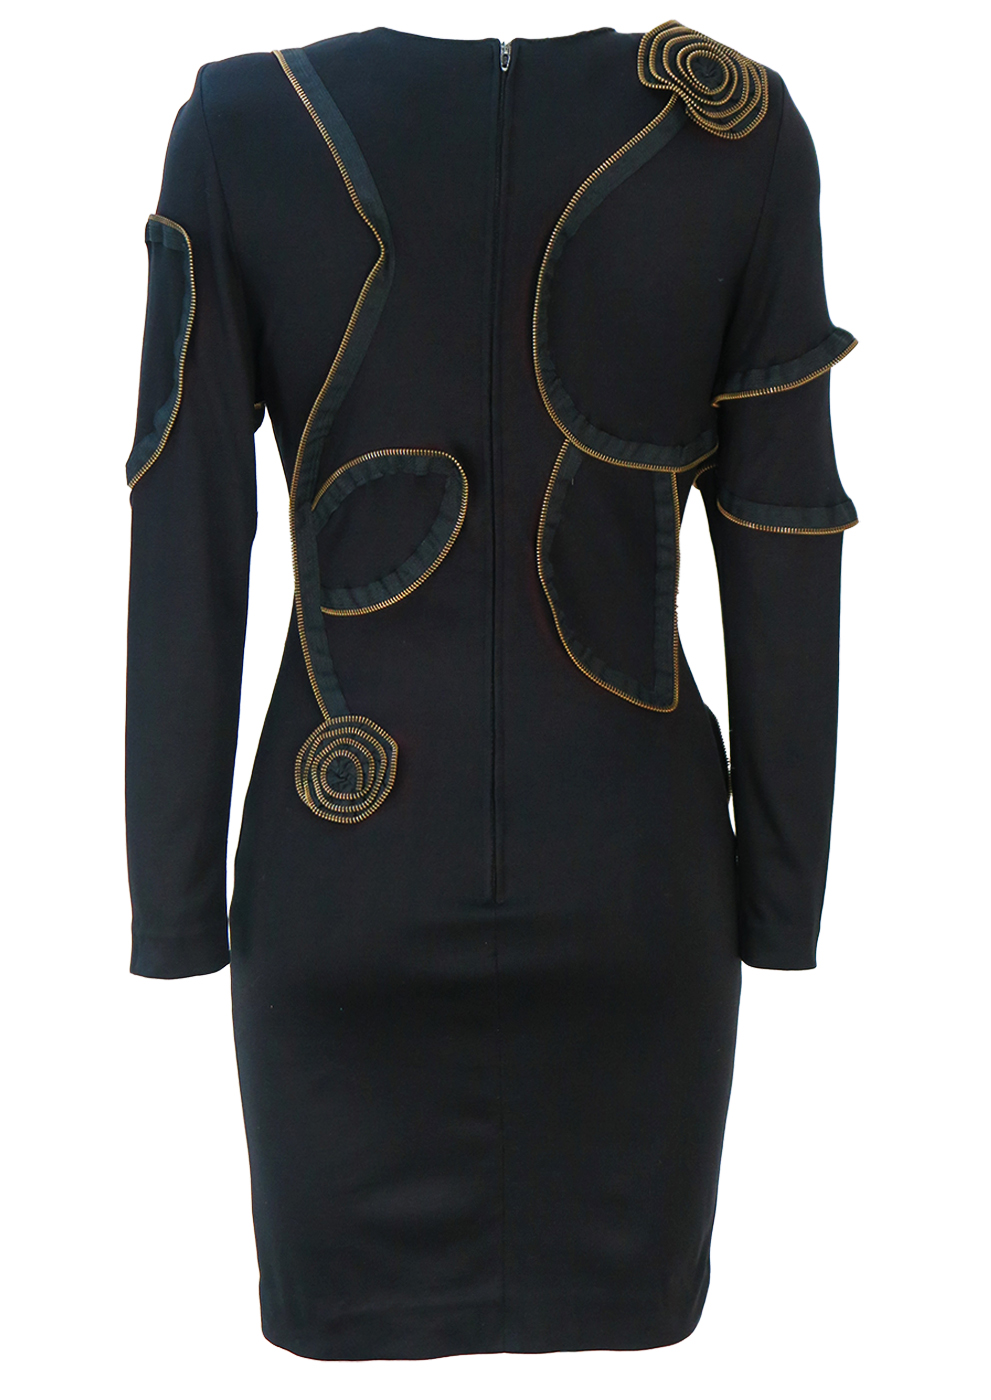 Luciano Pavarotti & Angela Gavioli Long Sleeved Black Bodycon Dress with  Floral Zip Pattern - XS/S